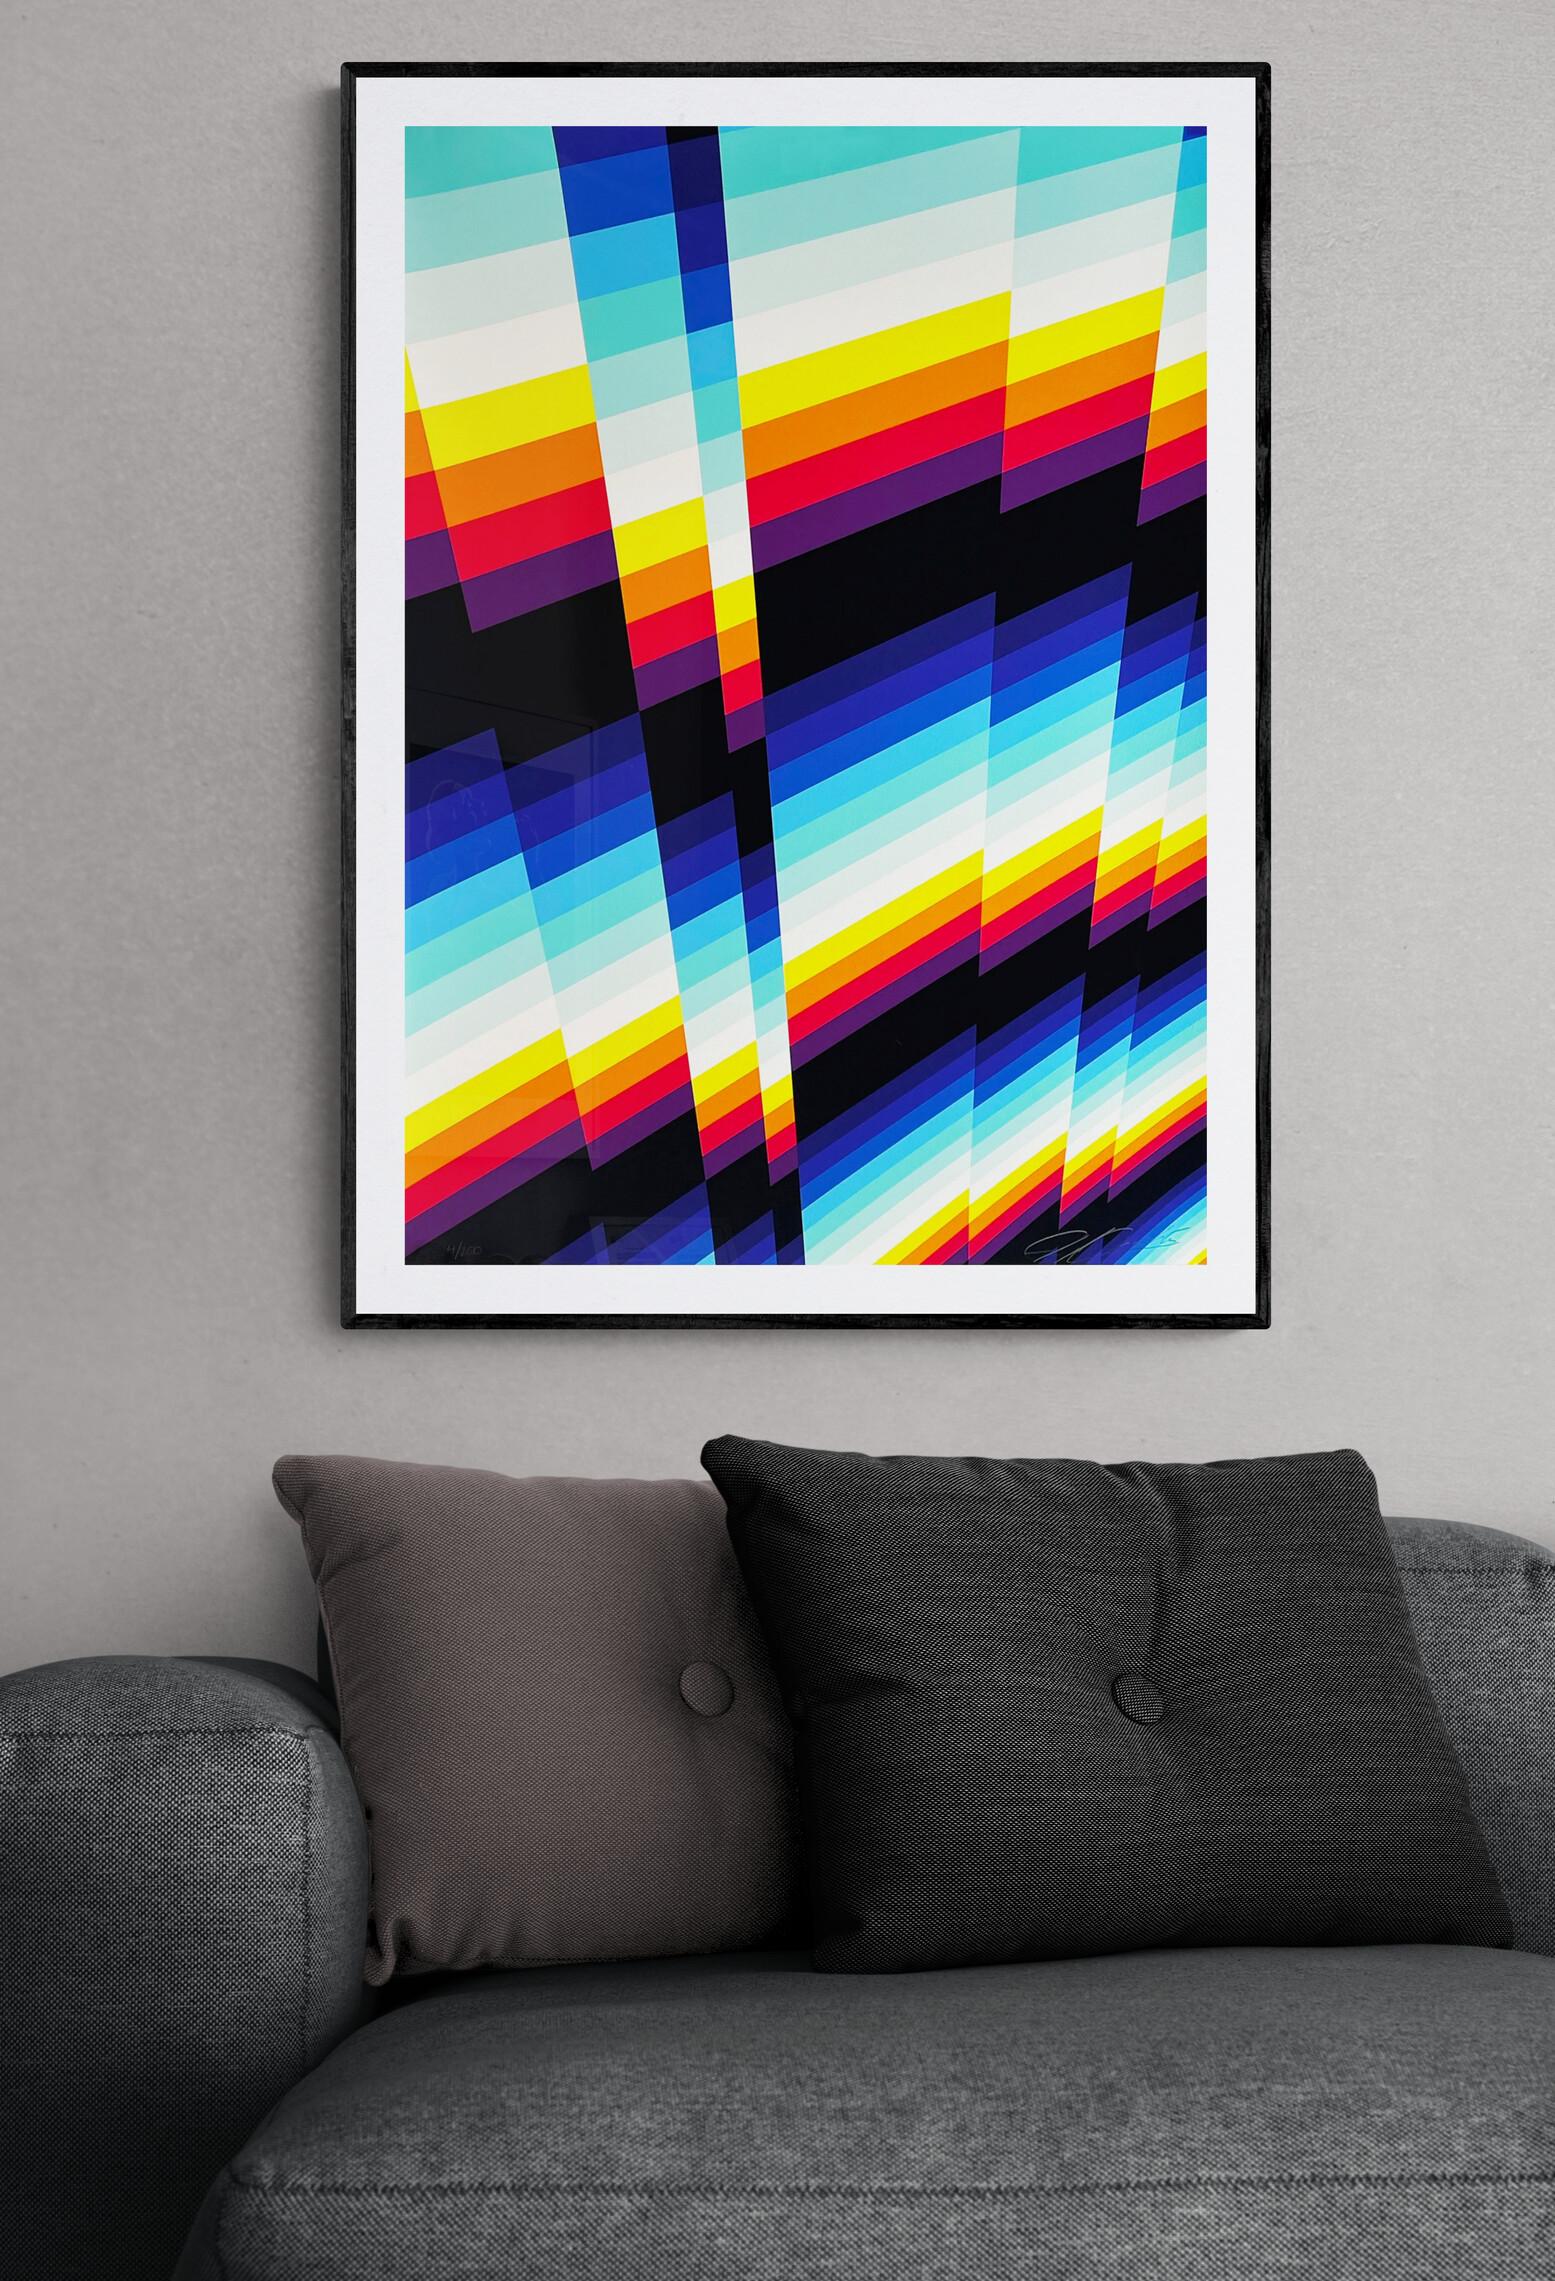 Felipe Pantone - CHROMADYNAMICA30P
Date of creation: 2022
Medium: Giclée on Archival cold press cotton rag 300gsm
Edition: 200
Size: 70 x 50 cm
Condition: In mint conditions, brand new and never framed
This is a giclée on Archival cold press cotton